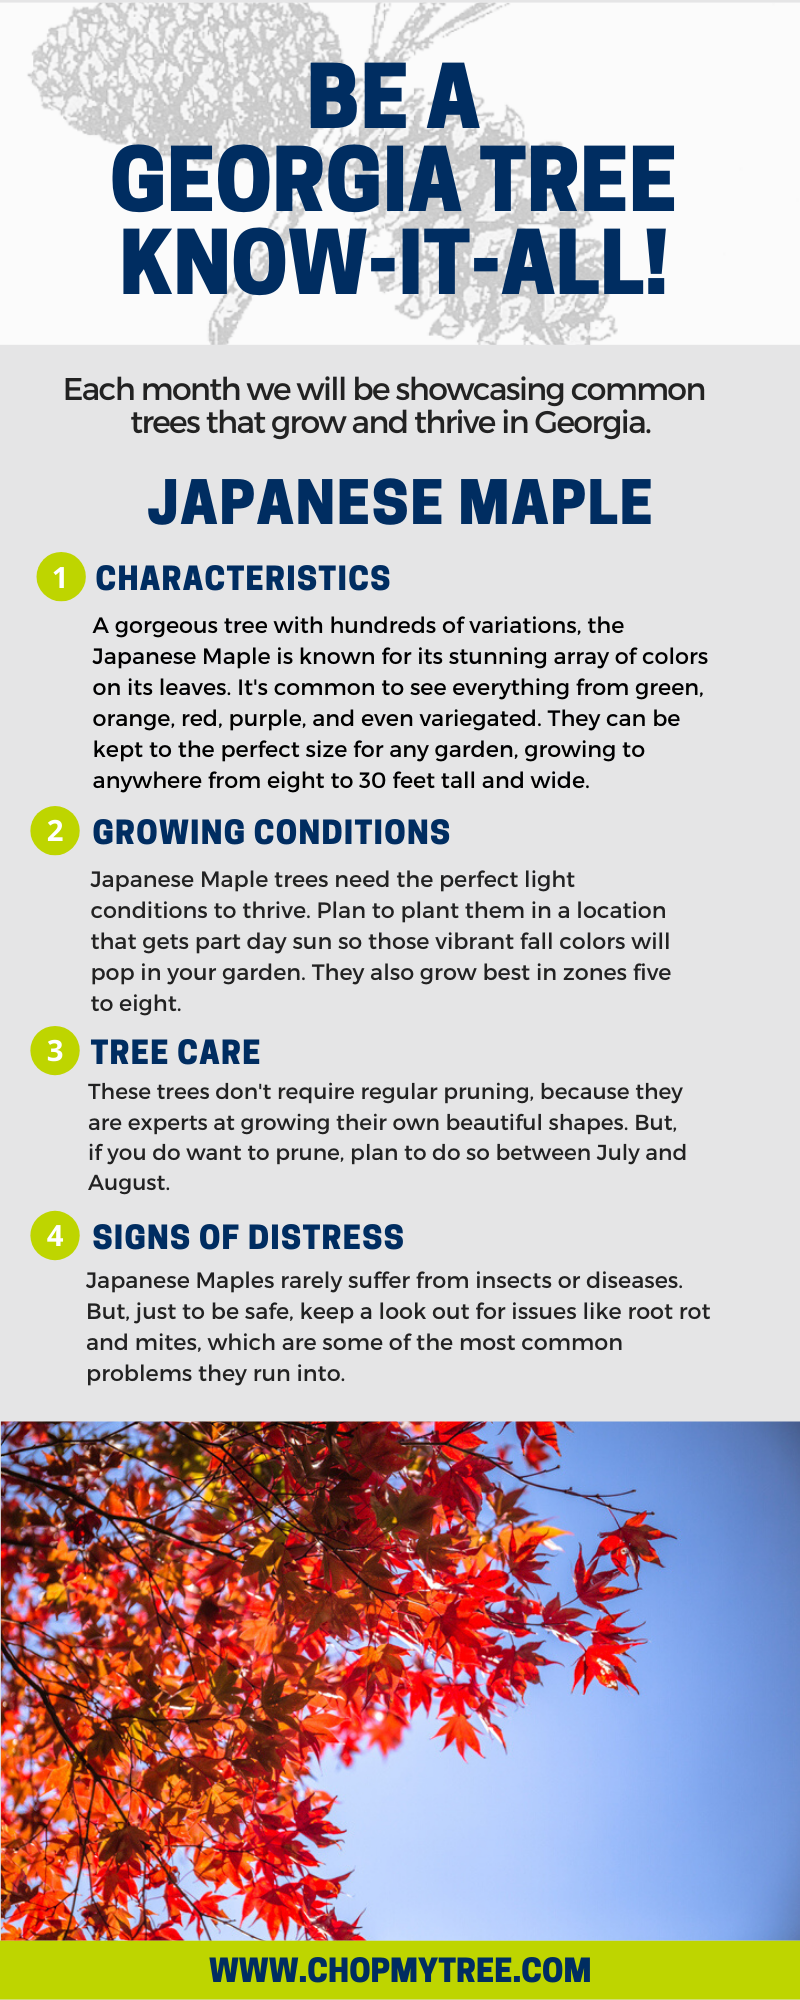 Infographic for Japanese Maple Tree